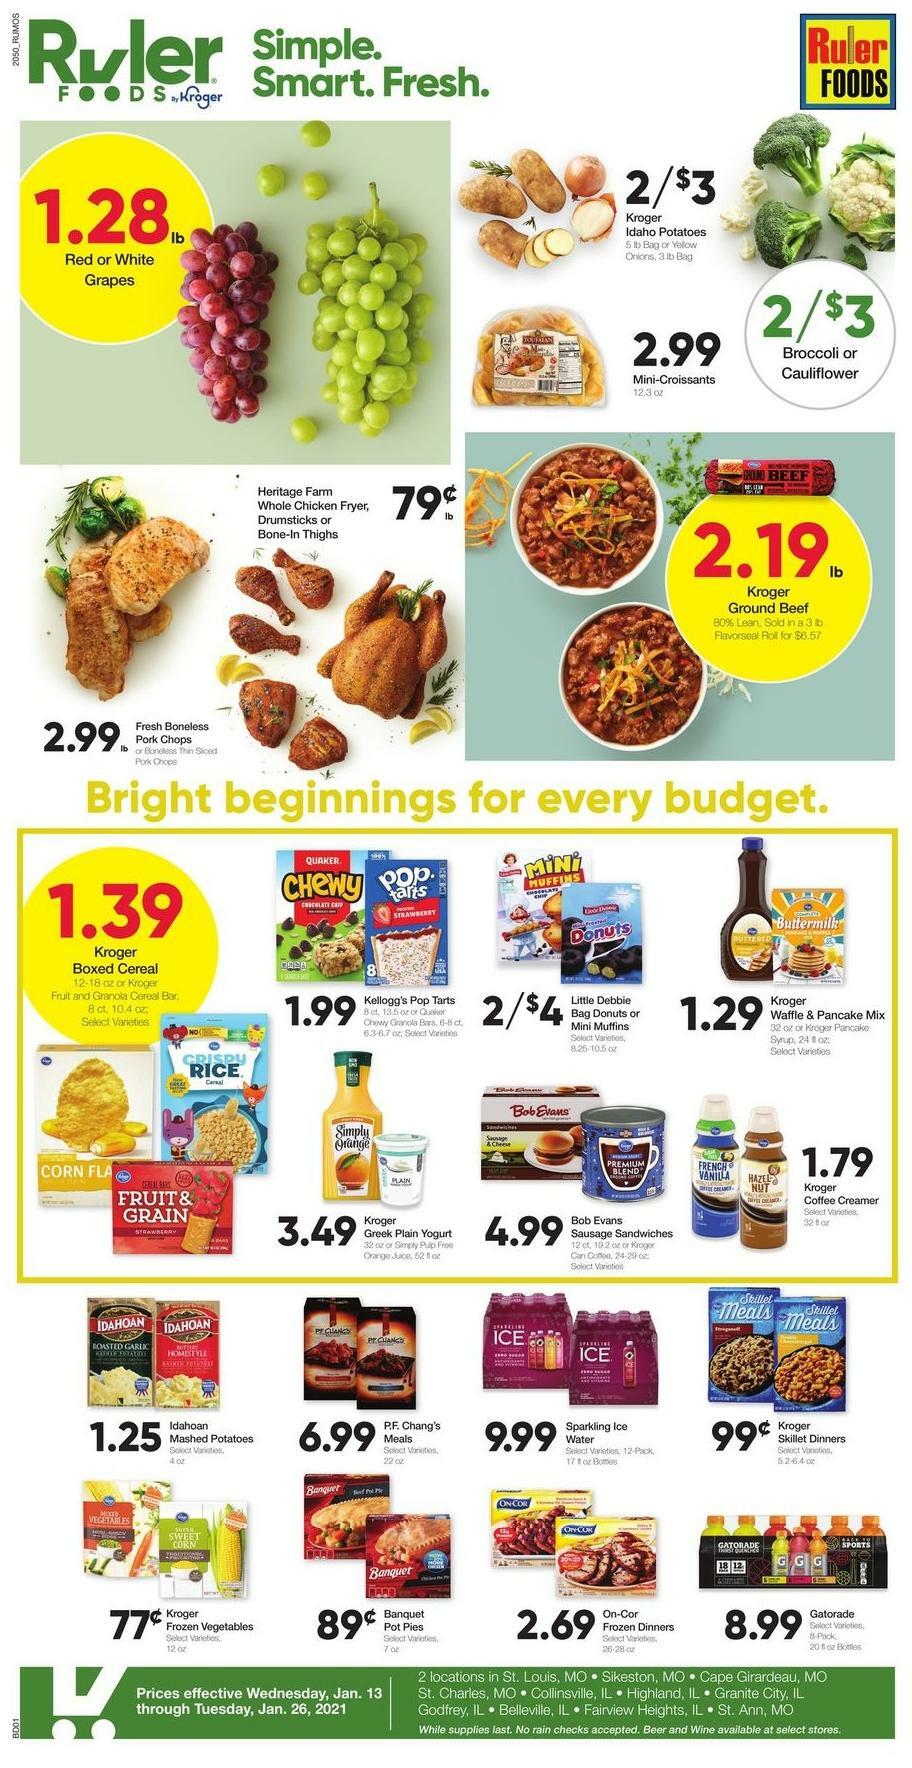 Ruler Foods Weekly Ad from January 13